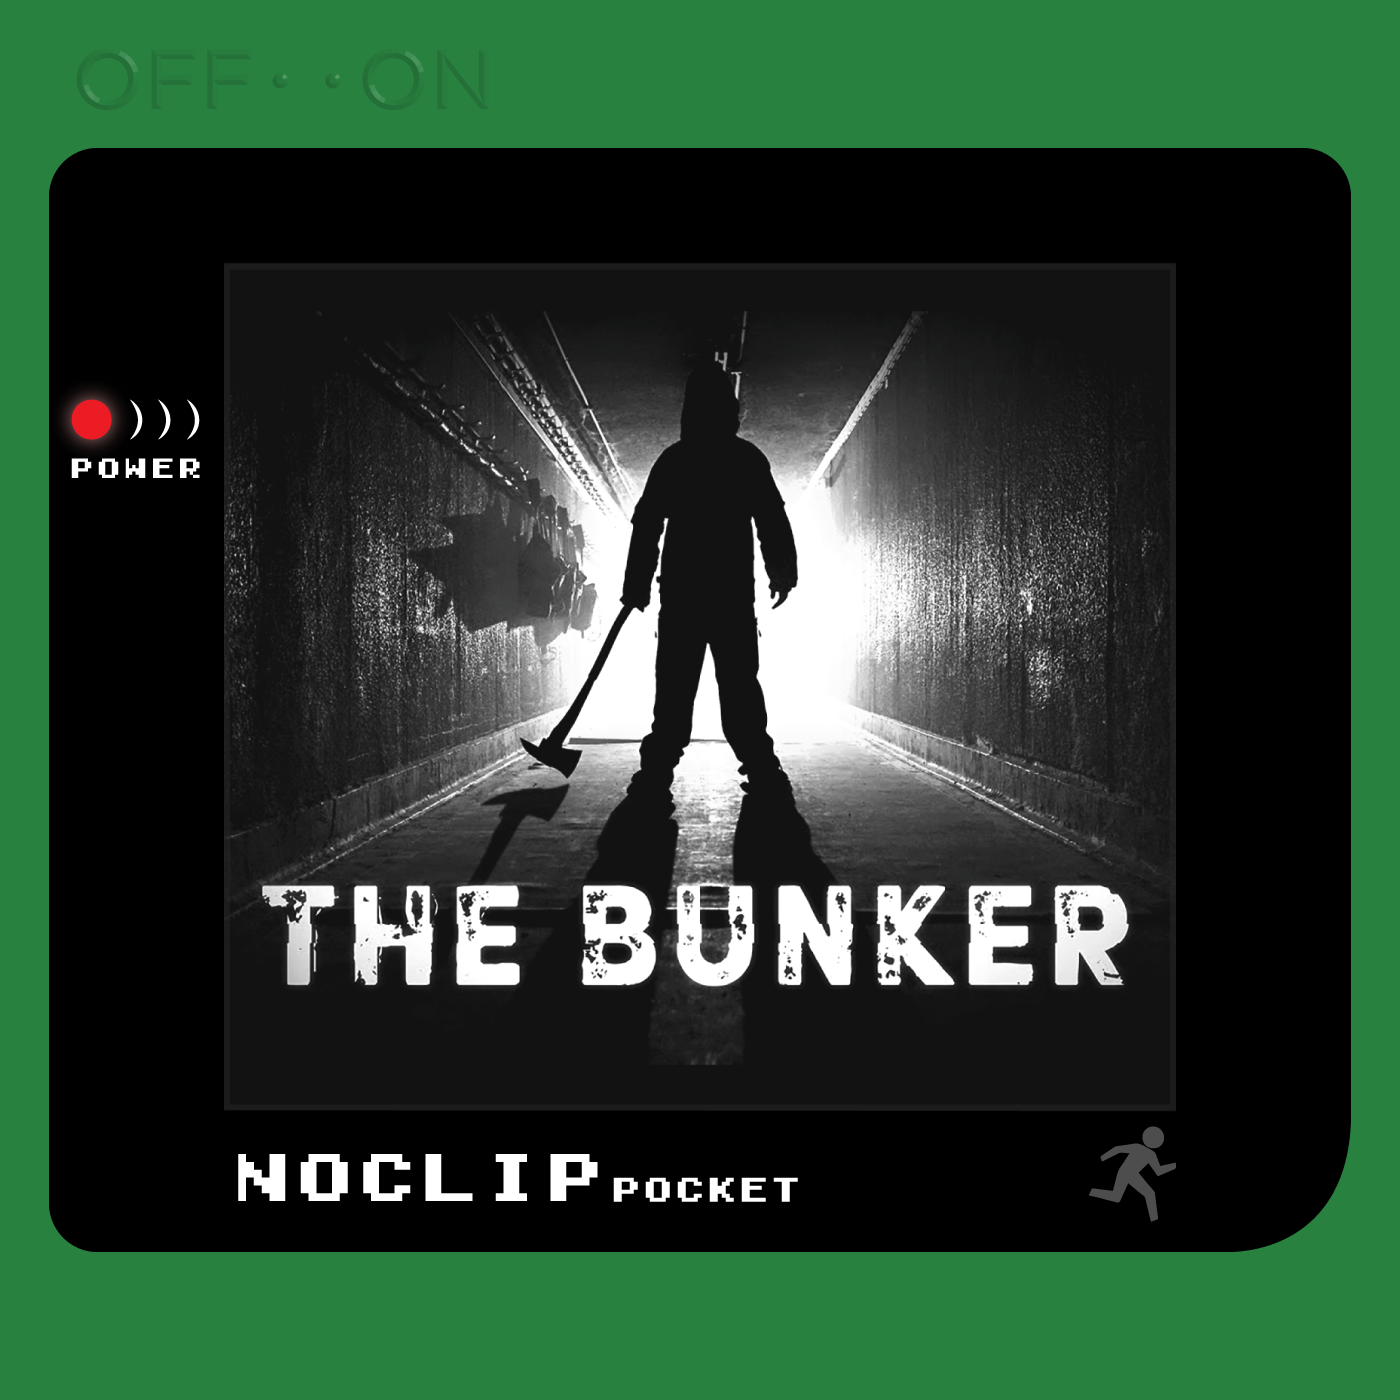 The Noclip Podcast on Apple Podcasts